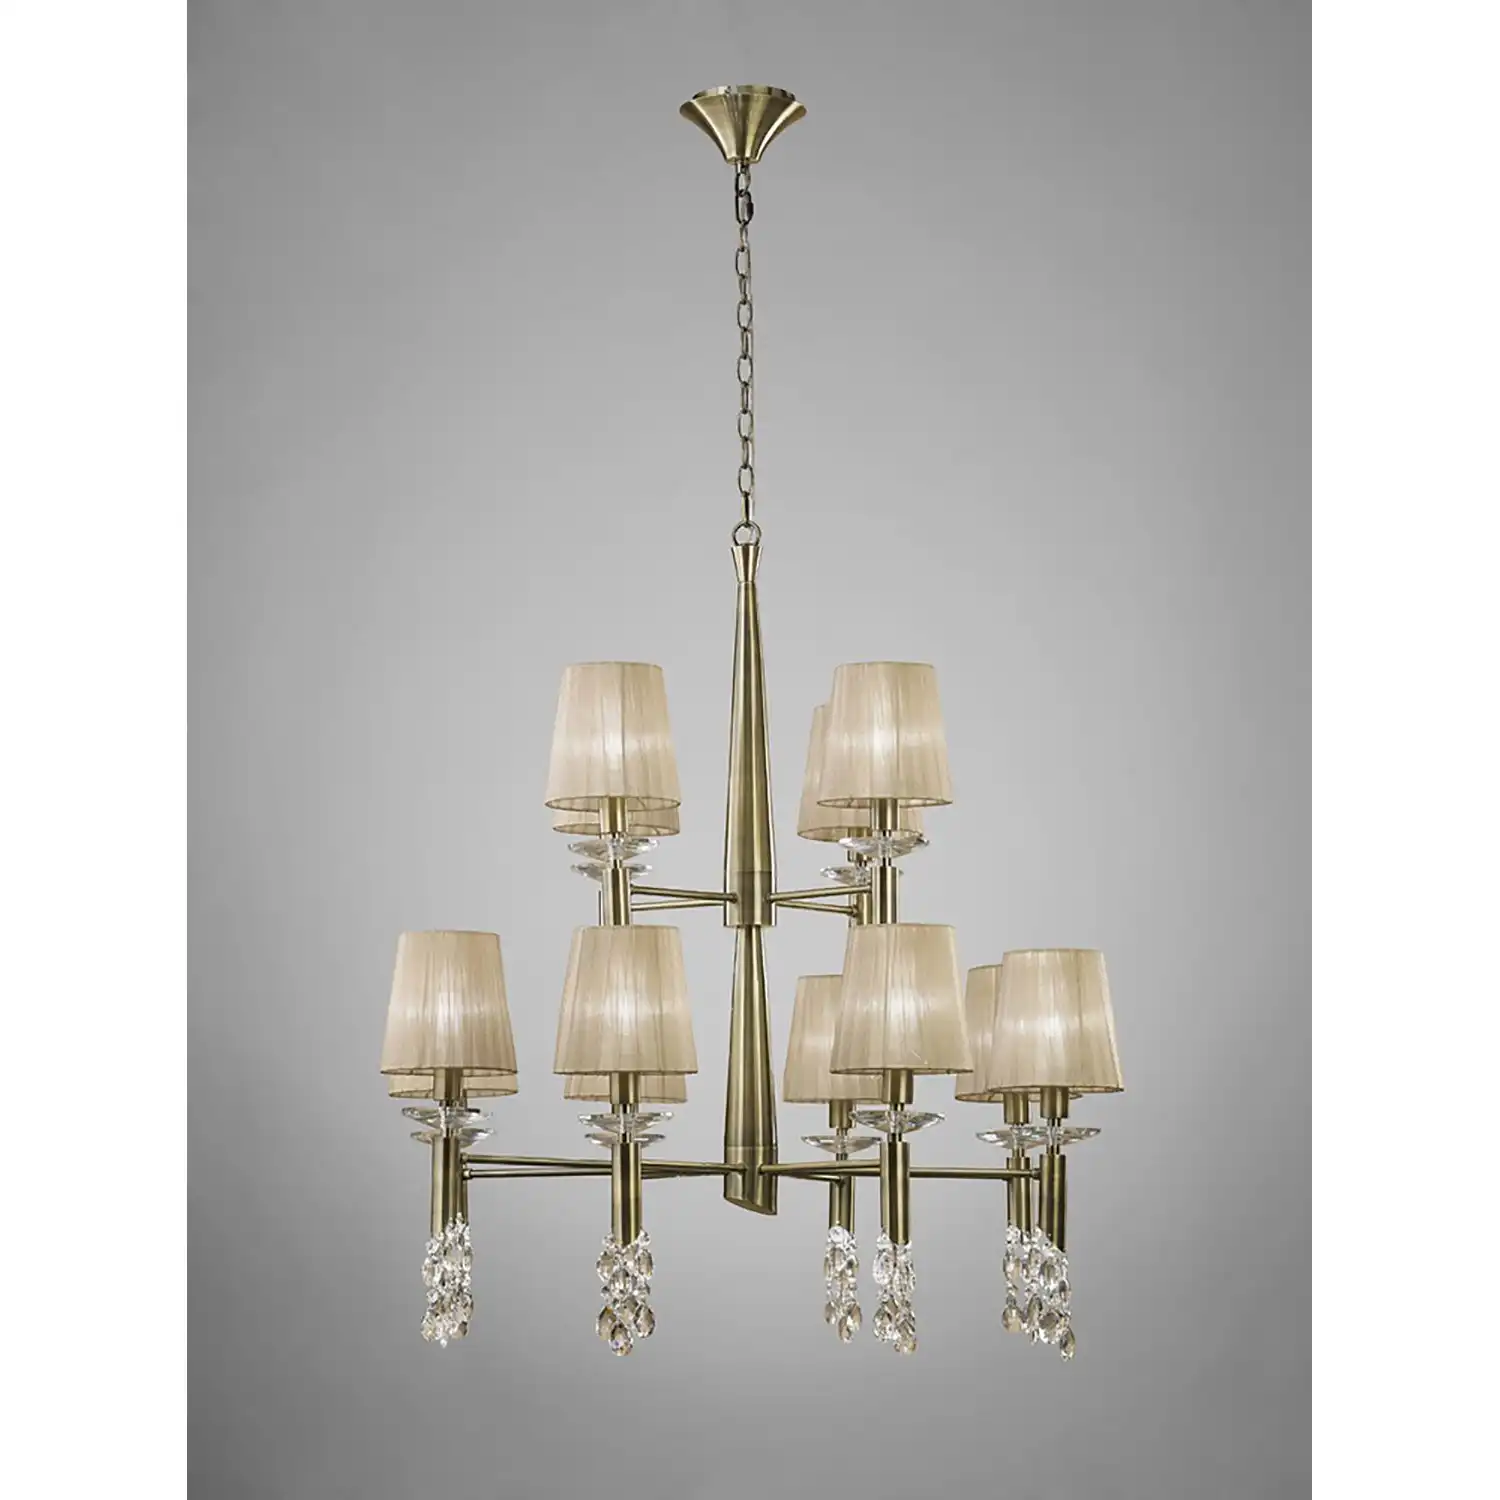 Tiffany Pendant 2 Tier 12+12 Light E14+G9, Antique Brass With Soft Bronze Shades And Clear Crystal